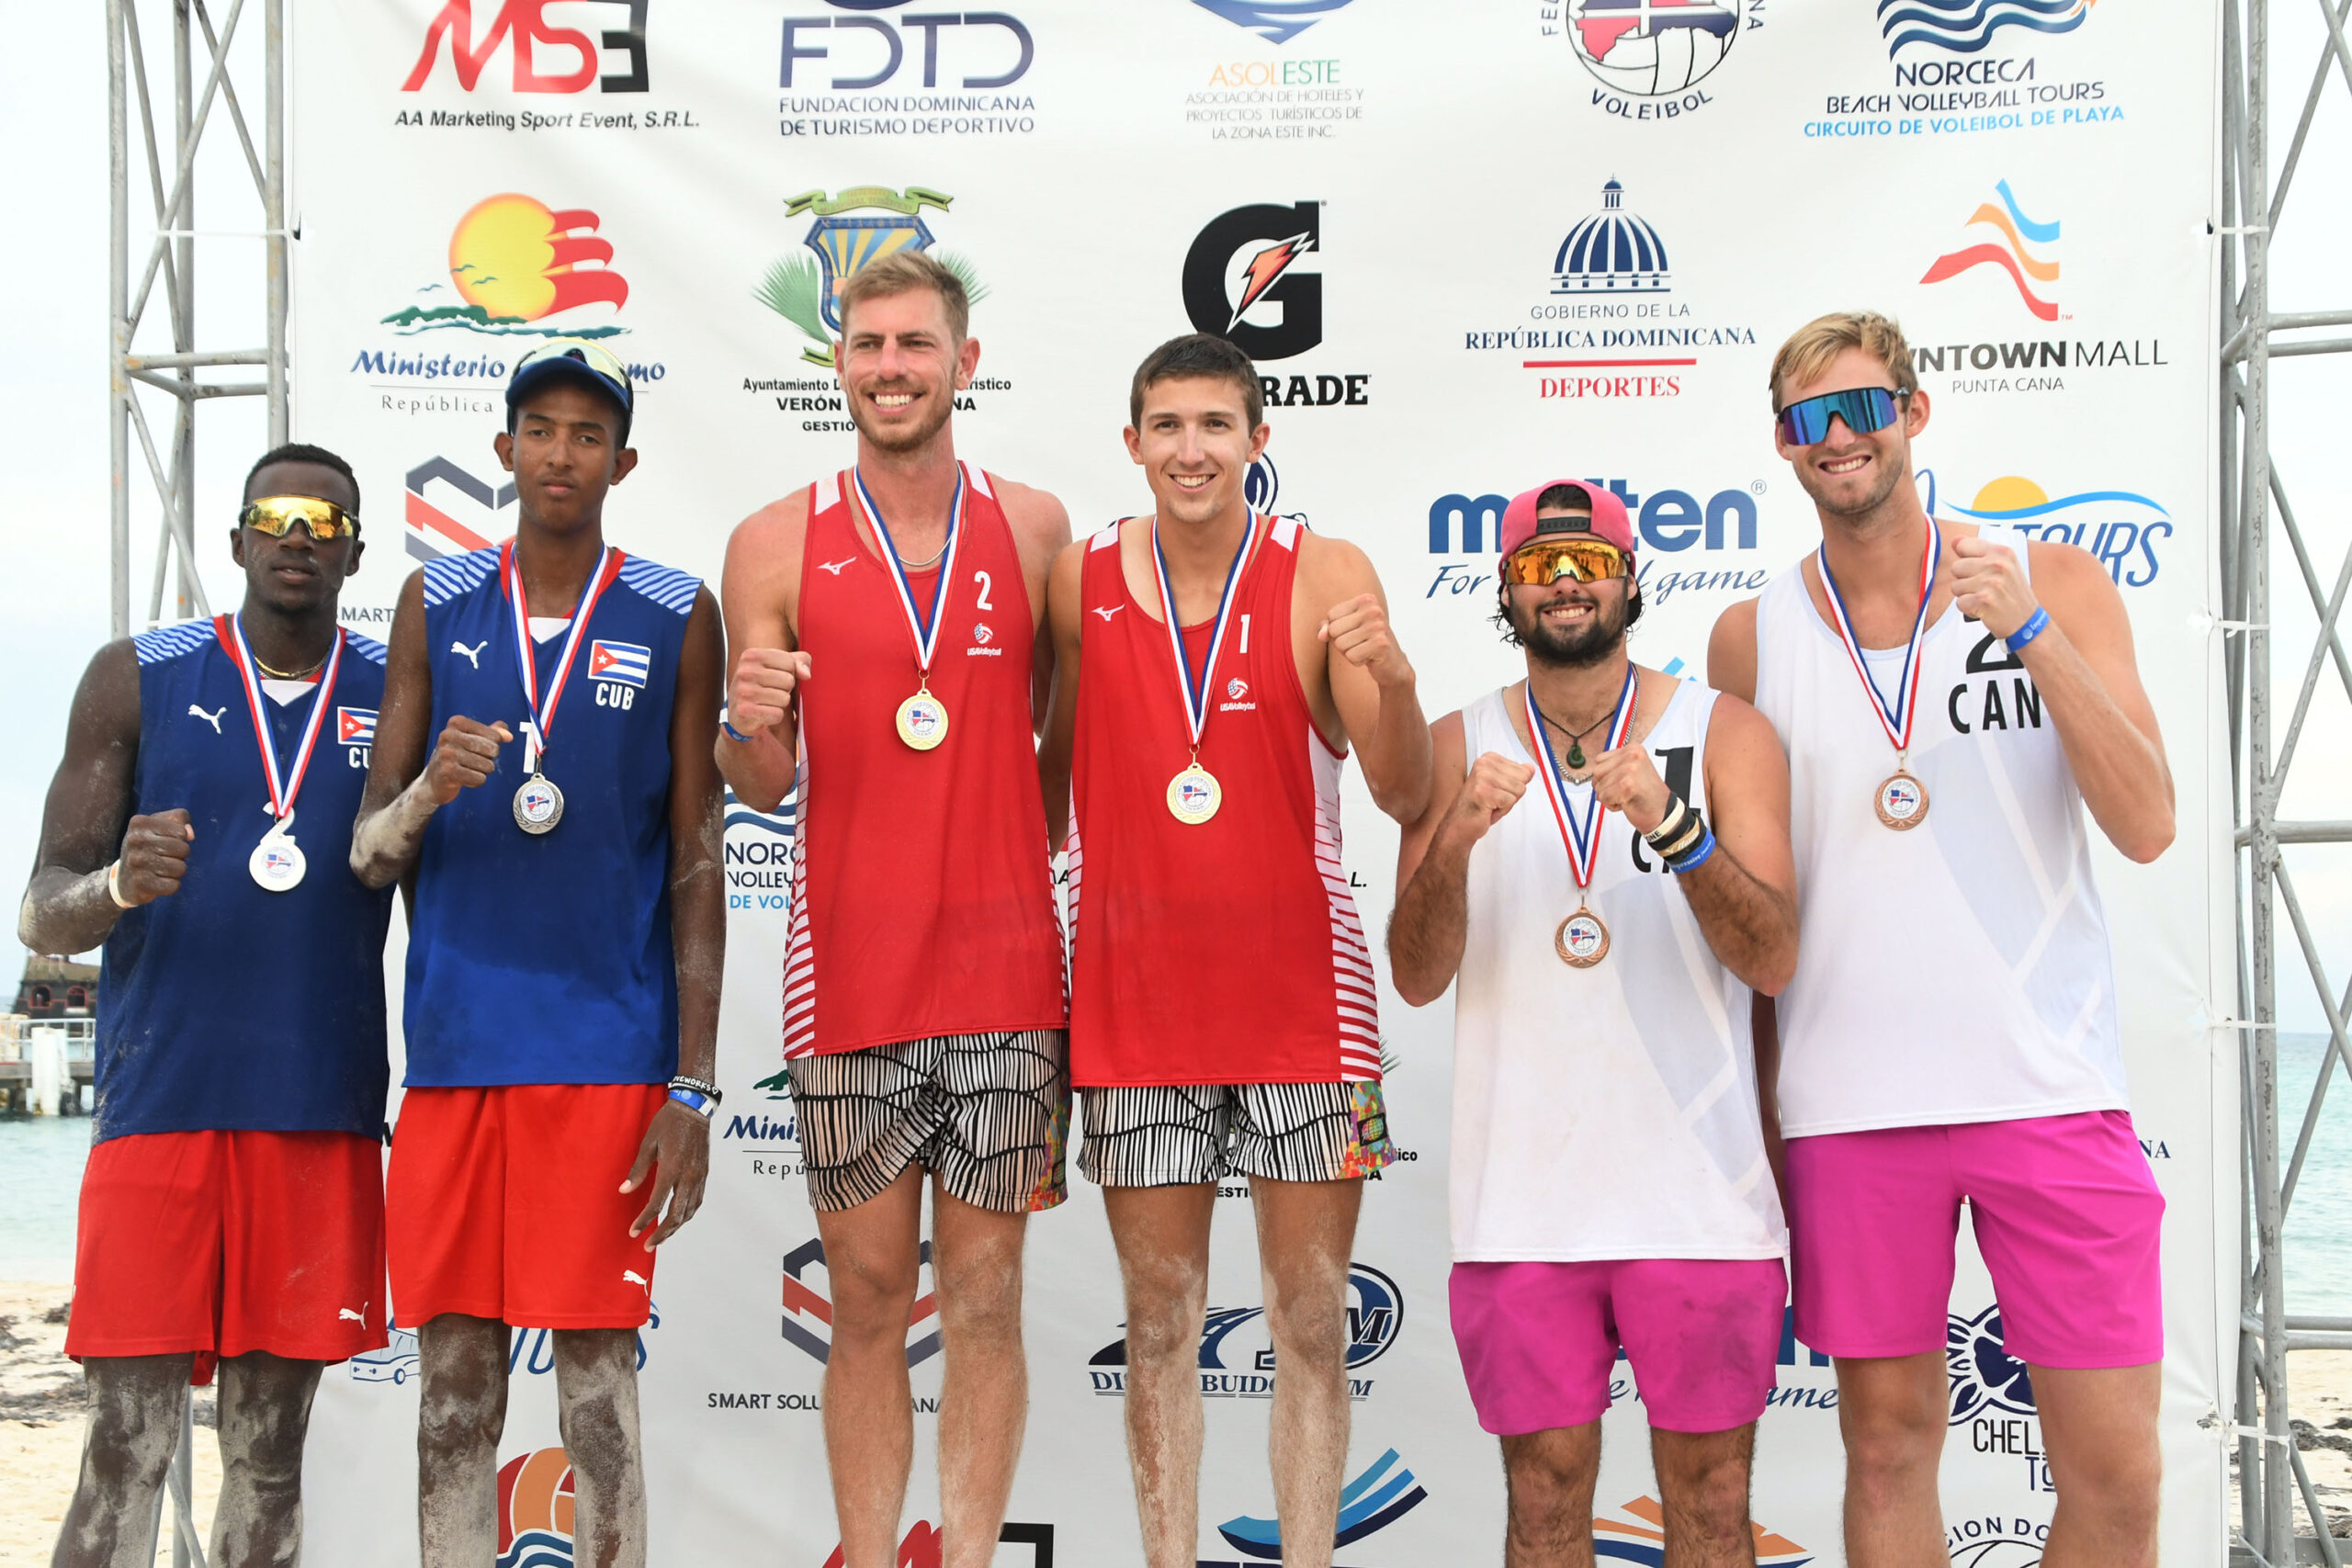 Timothy Brewster and Kyle Friend of USA win Men’s Gold in Punta Cana